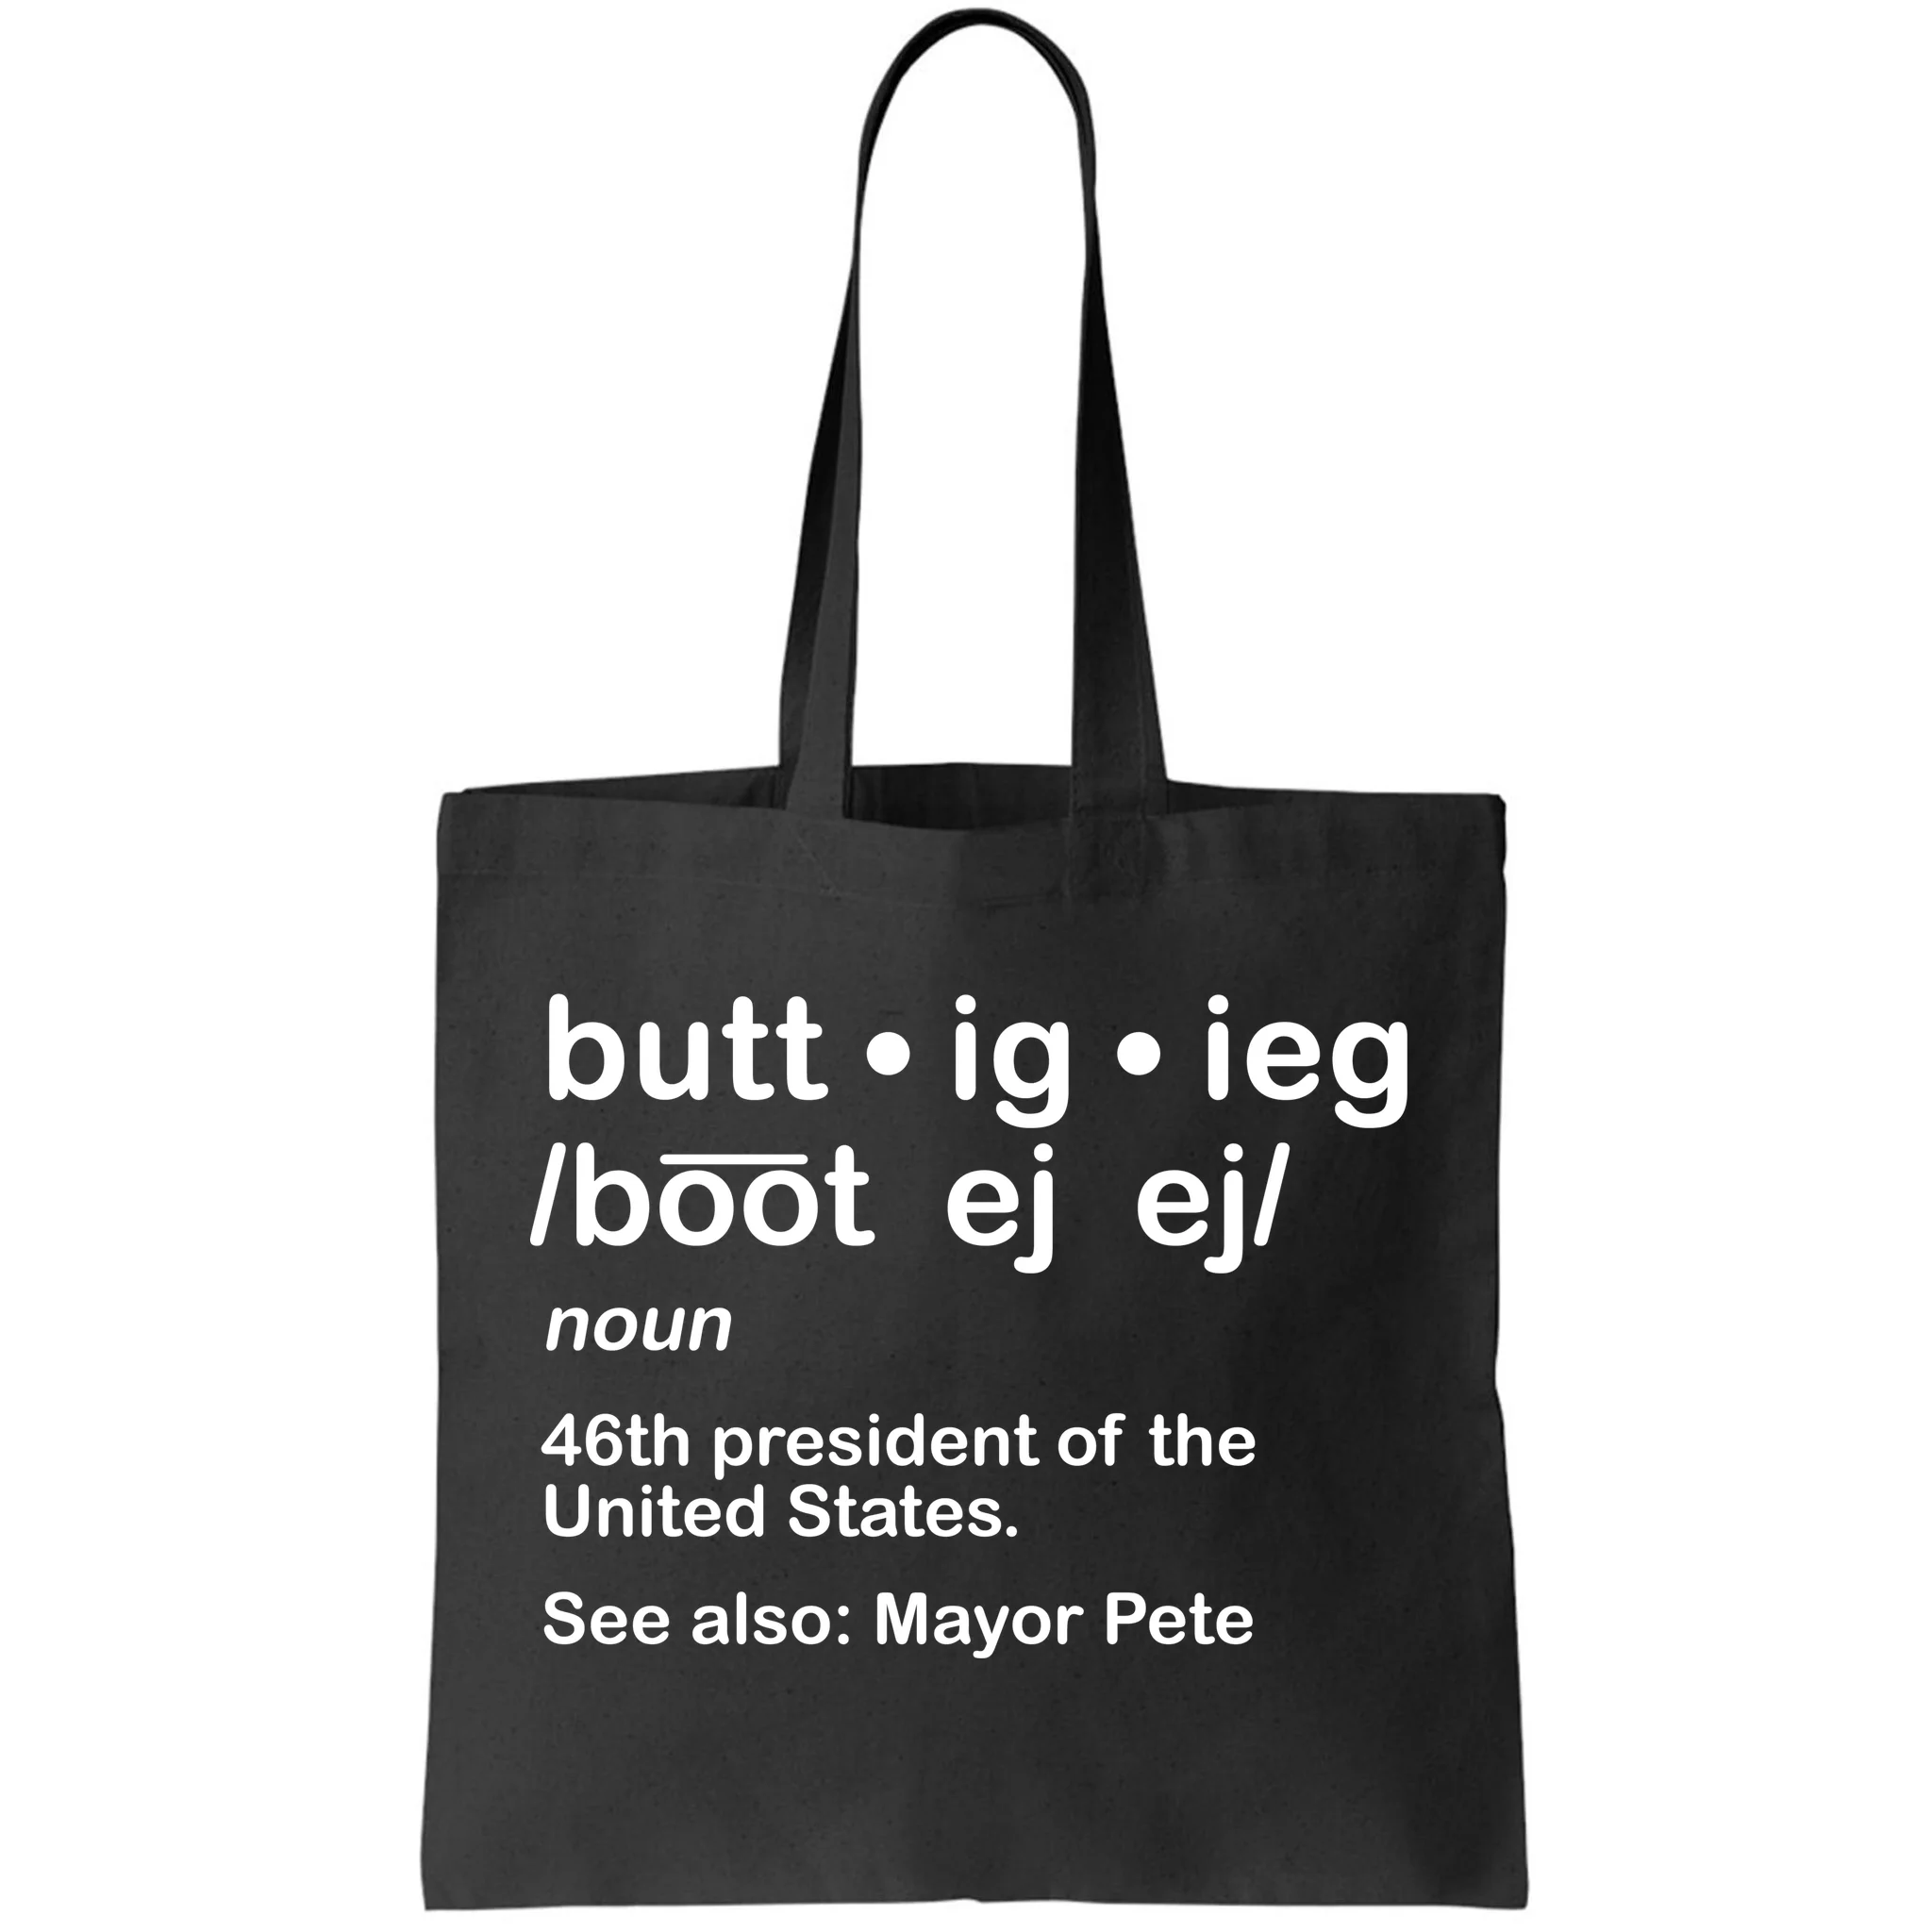 How to Pronounce Tote Bag - YouTube